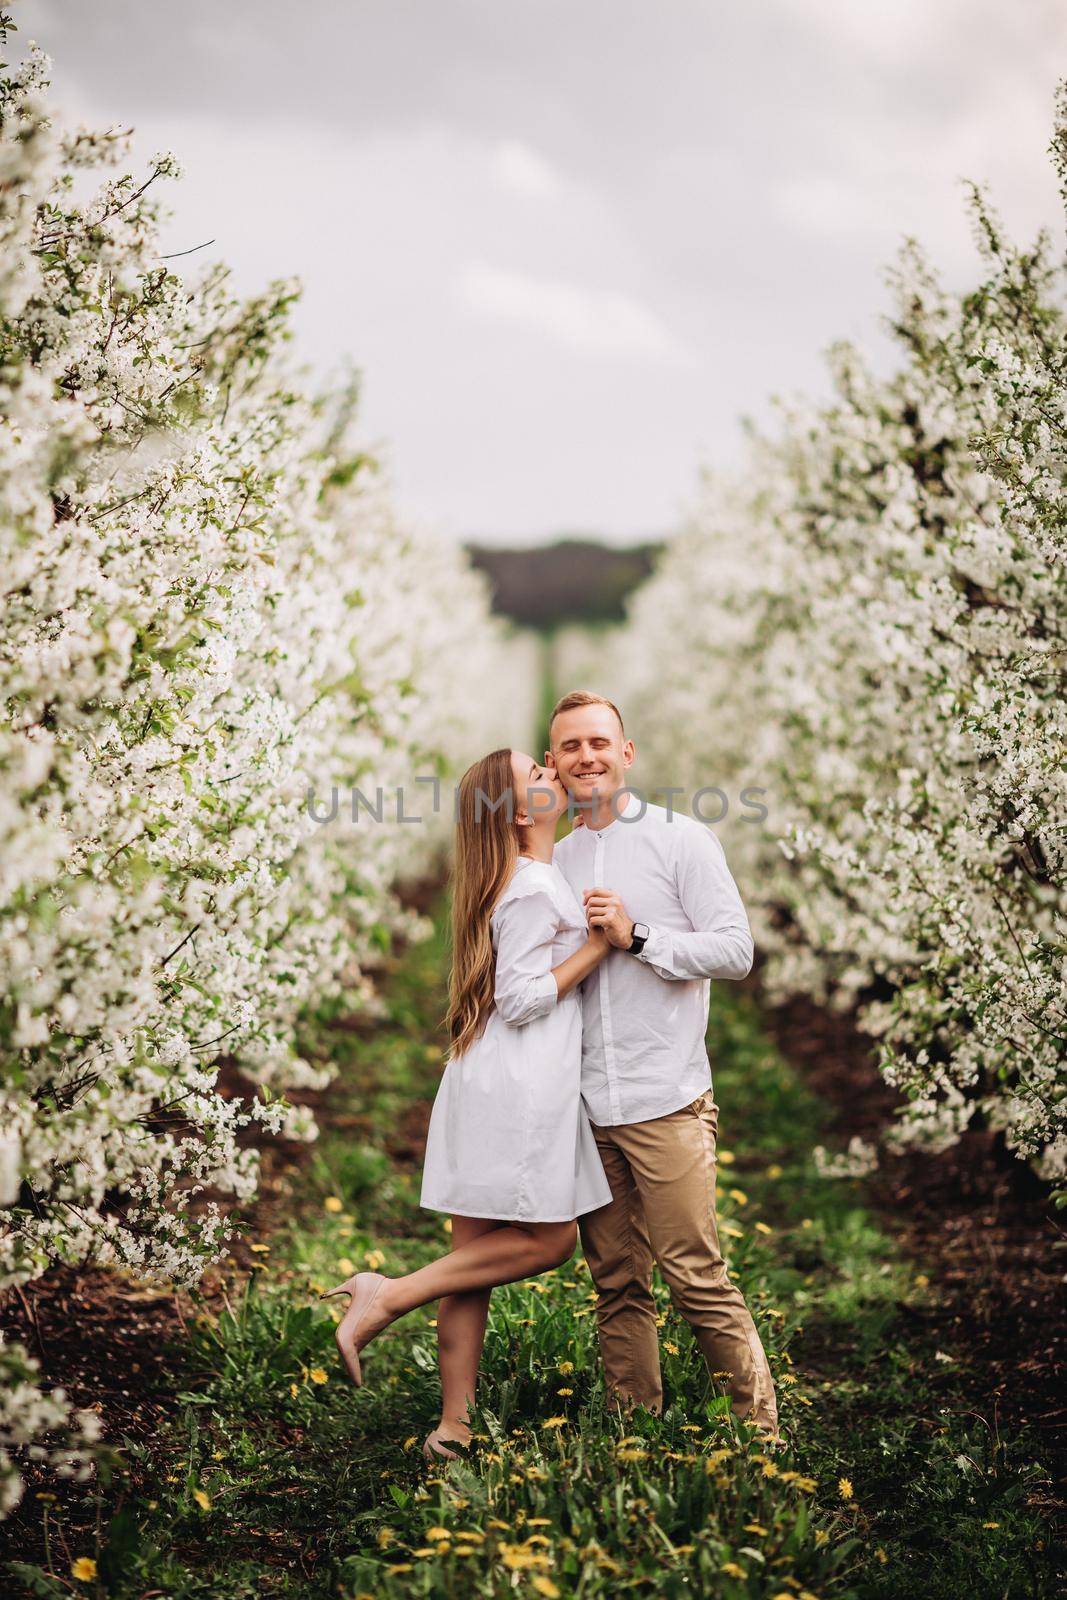 Beautiful young couple in a romantic place, spring blooming apple orchard. Happy joyful couple enjoy each other while walking in the garden. Man holding woman's hand by Dmitrytph